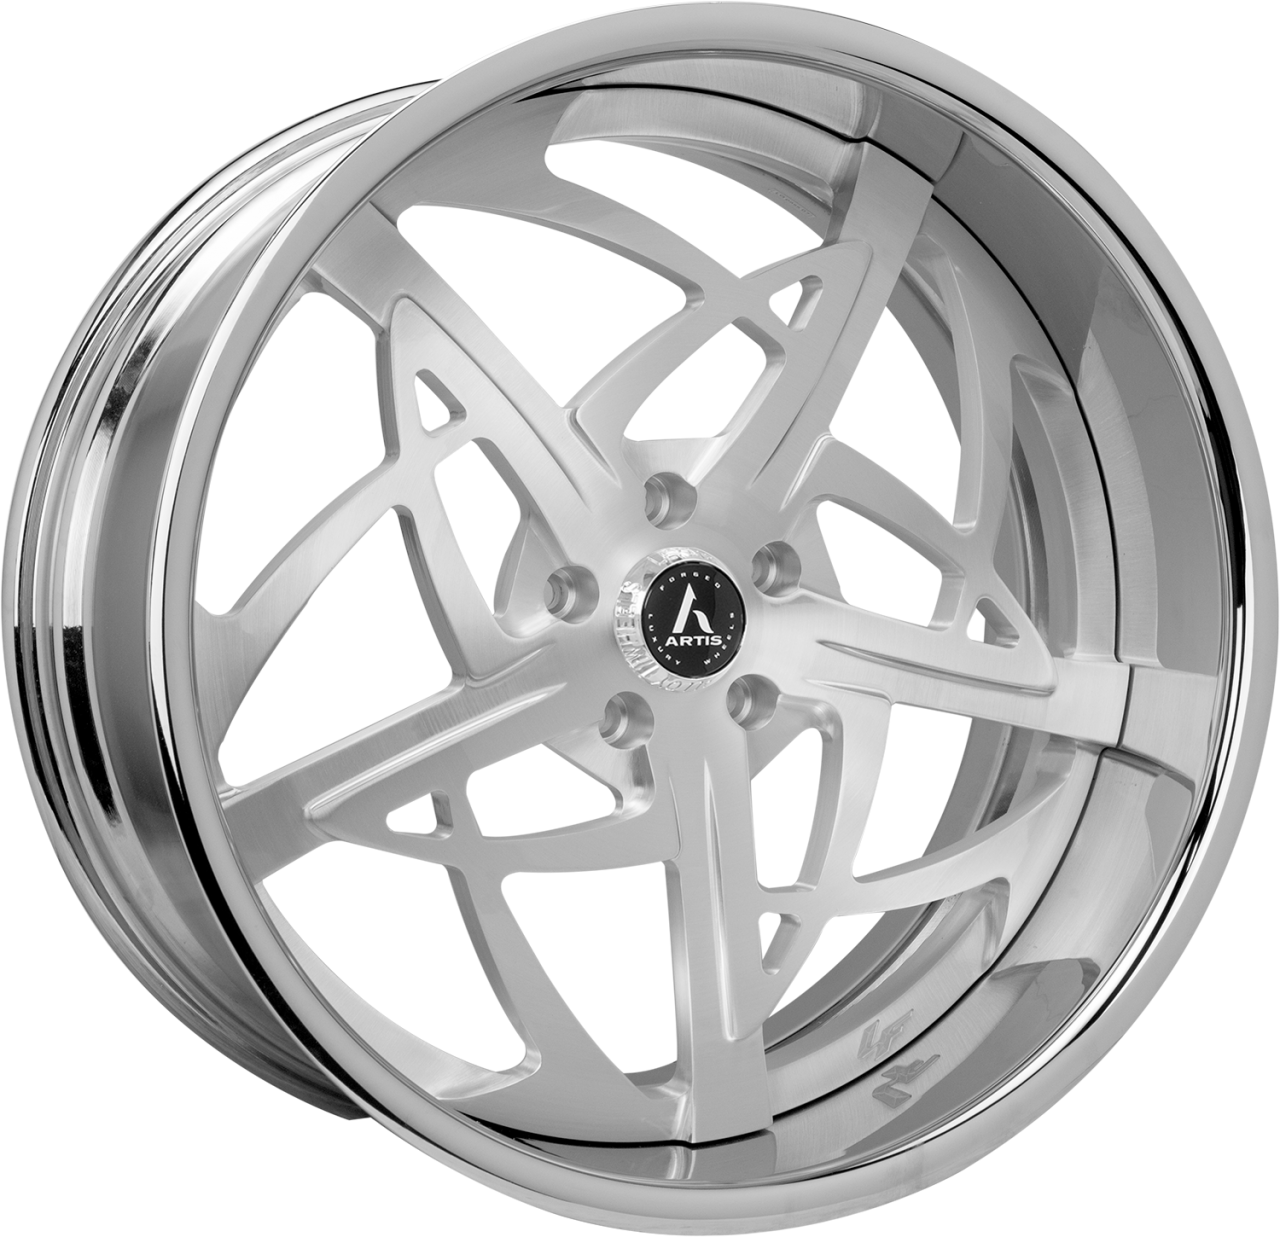 Artis Forged Spartan wheel with Brushed finish